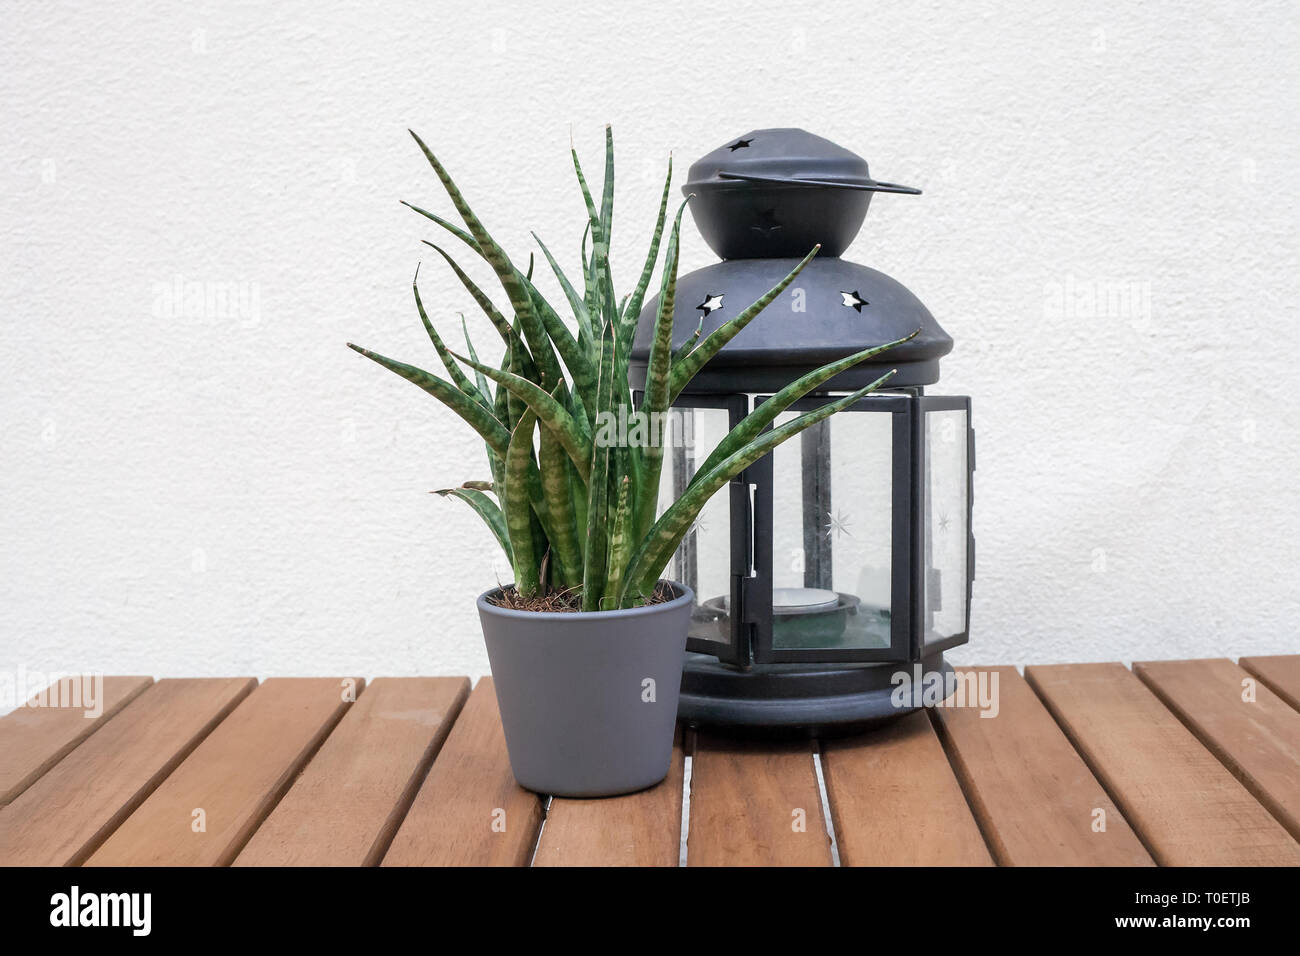 Old glass lantern with candle and Sansevieria cylindrica (cylindrical snake plant) potted flower on wooden table by white wall background. Home decor  Stock Photo